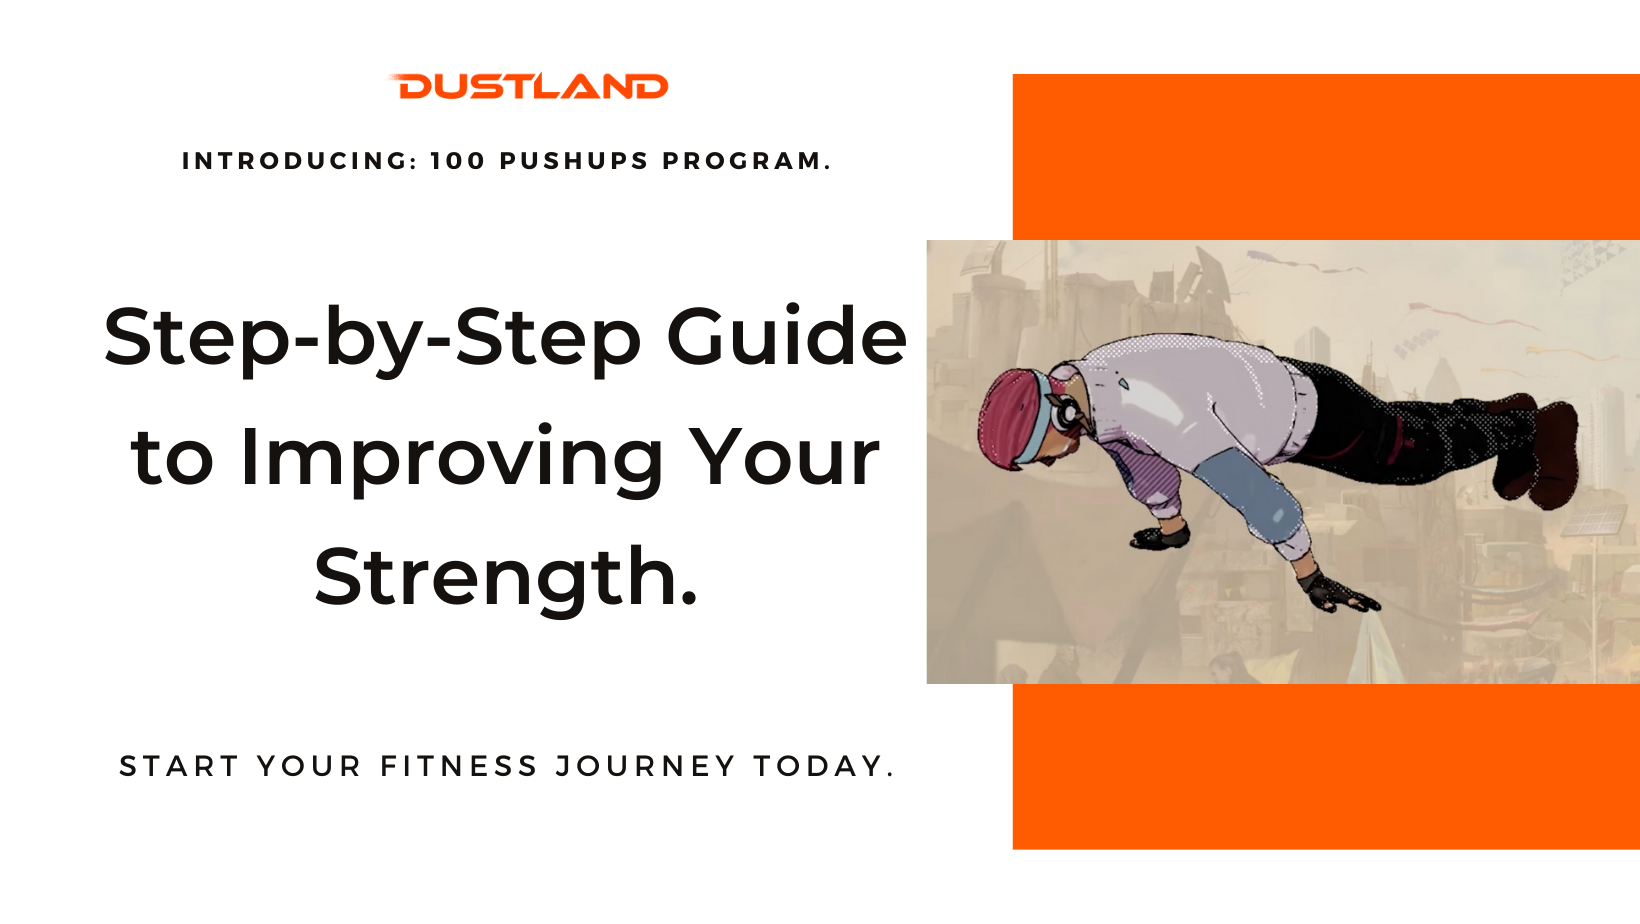 How to start your fitness journey - guide